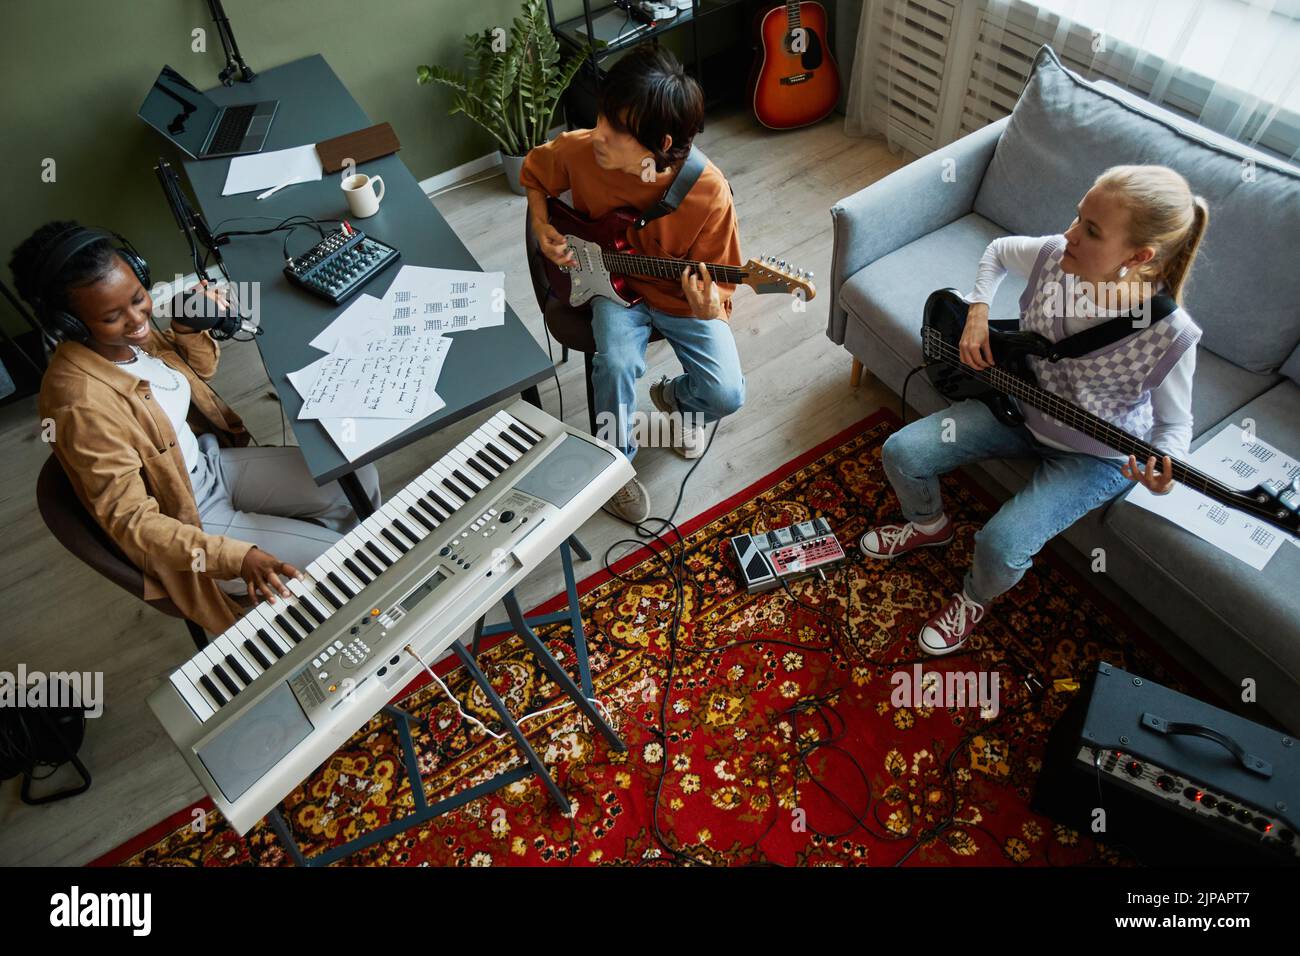 Top view at band of young musicians playing instruments together in cozy home studio Stock Photo